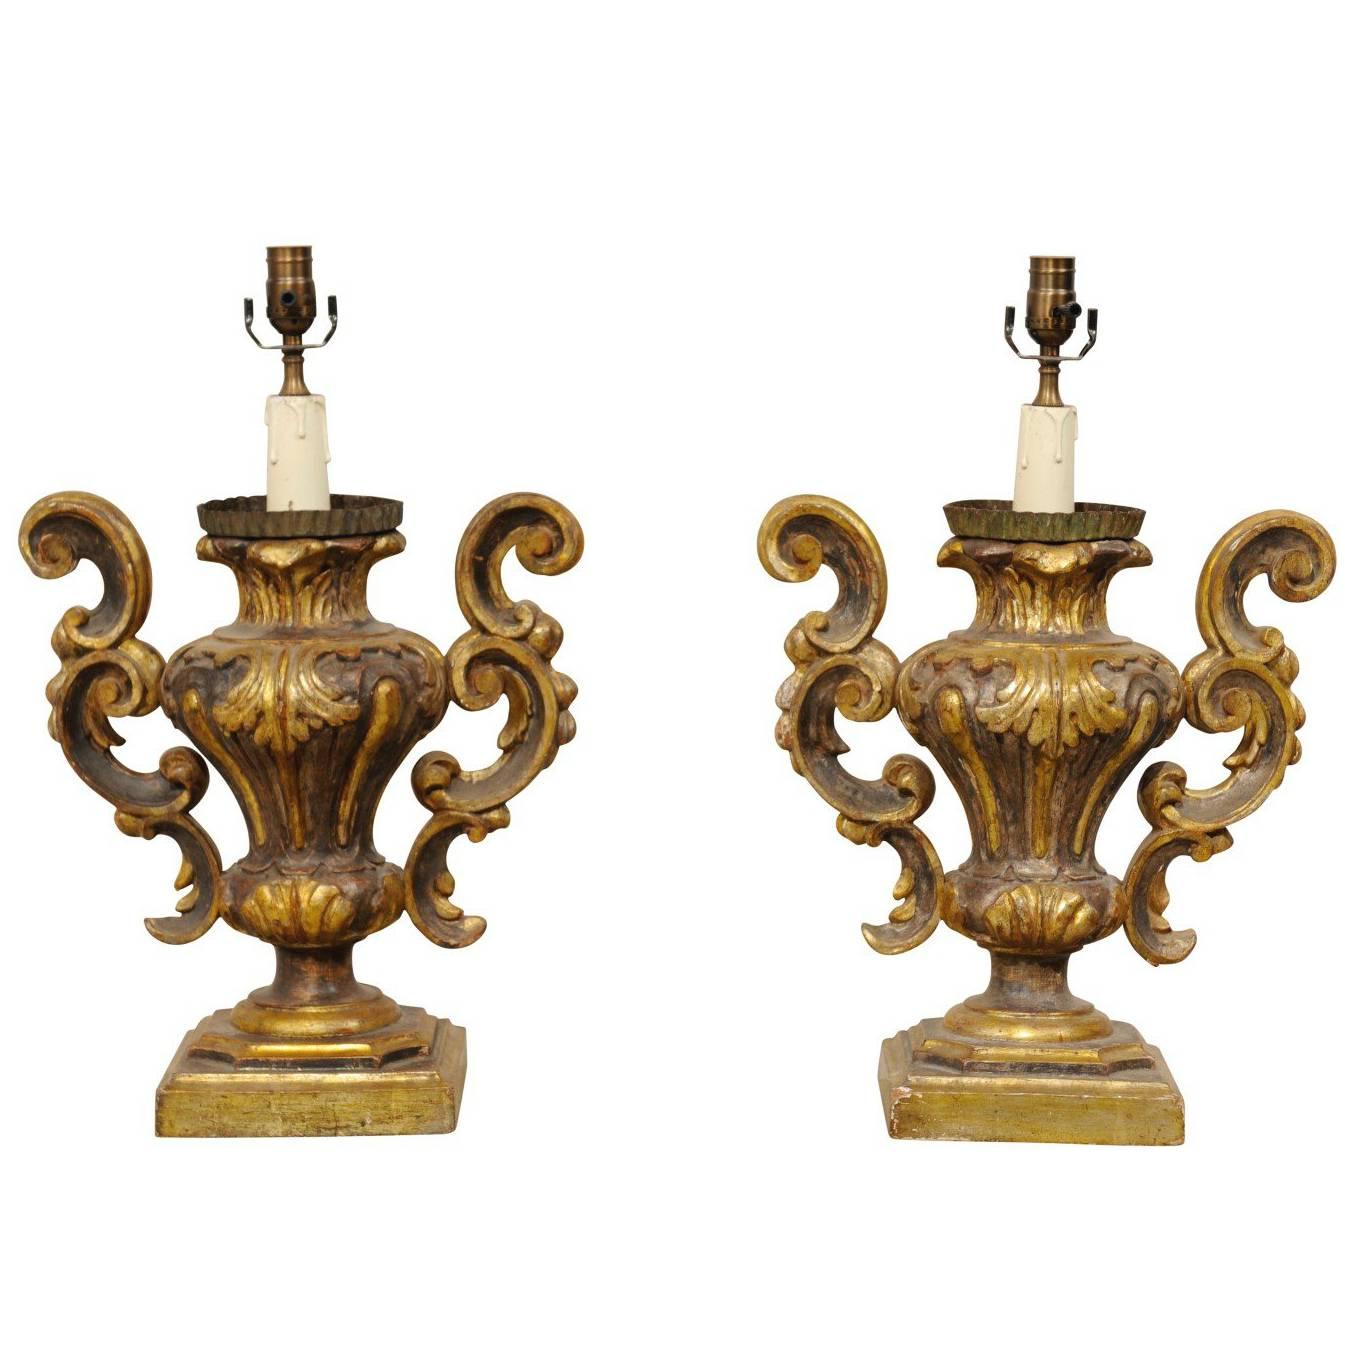 Pair of Italian Rococo Style Gilded Table Lamps with Classic Urn Shape & Foliage